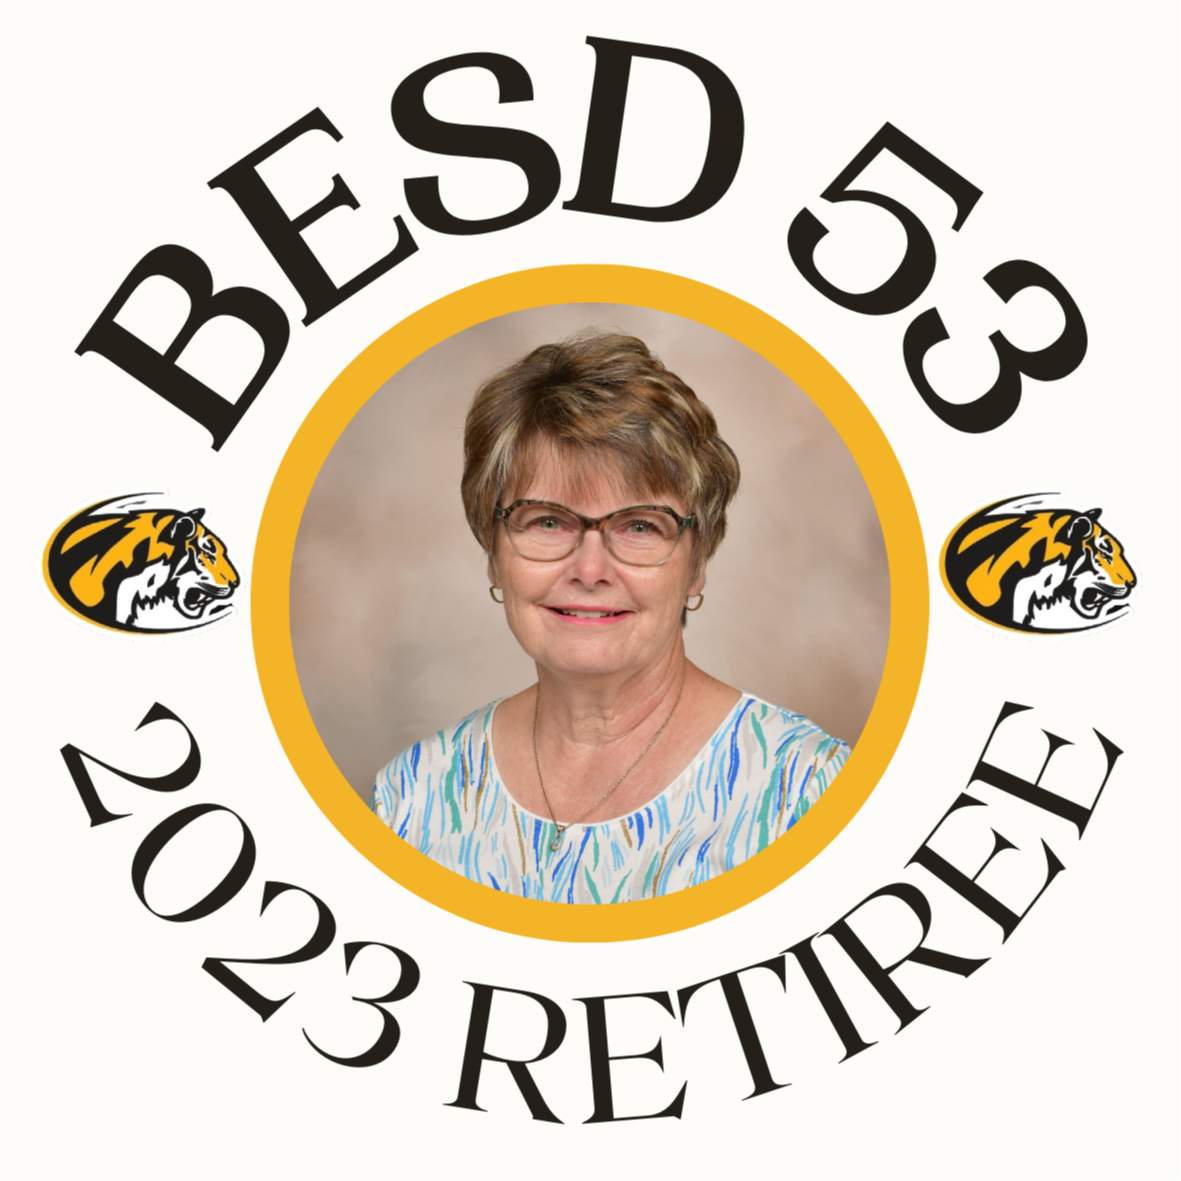 Circle image with words BESD 53 2023 RETIREE and photo of Woman with short hair and glasses in the center